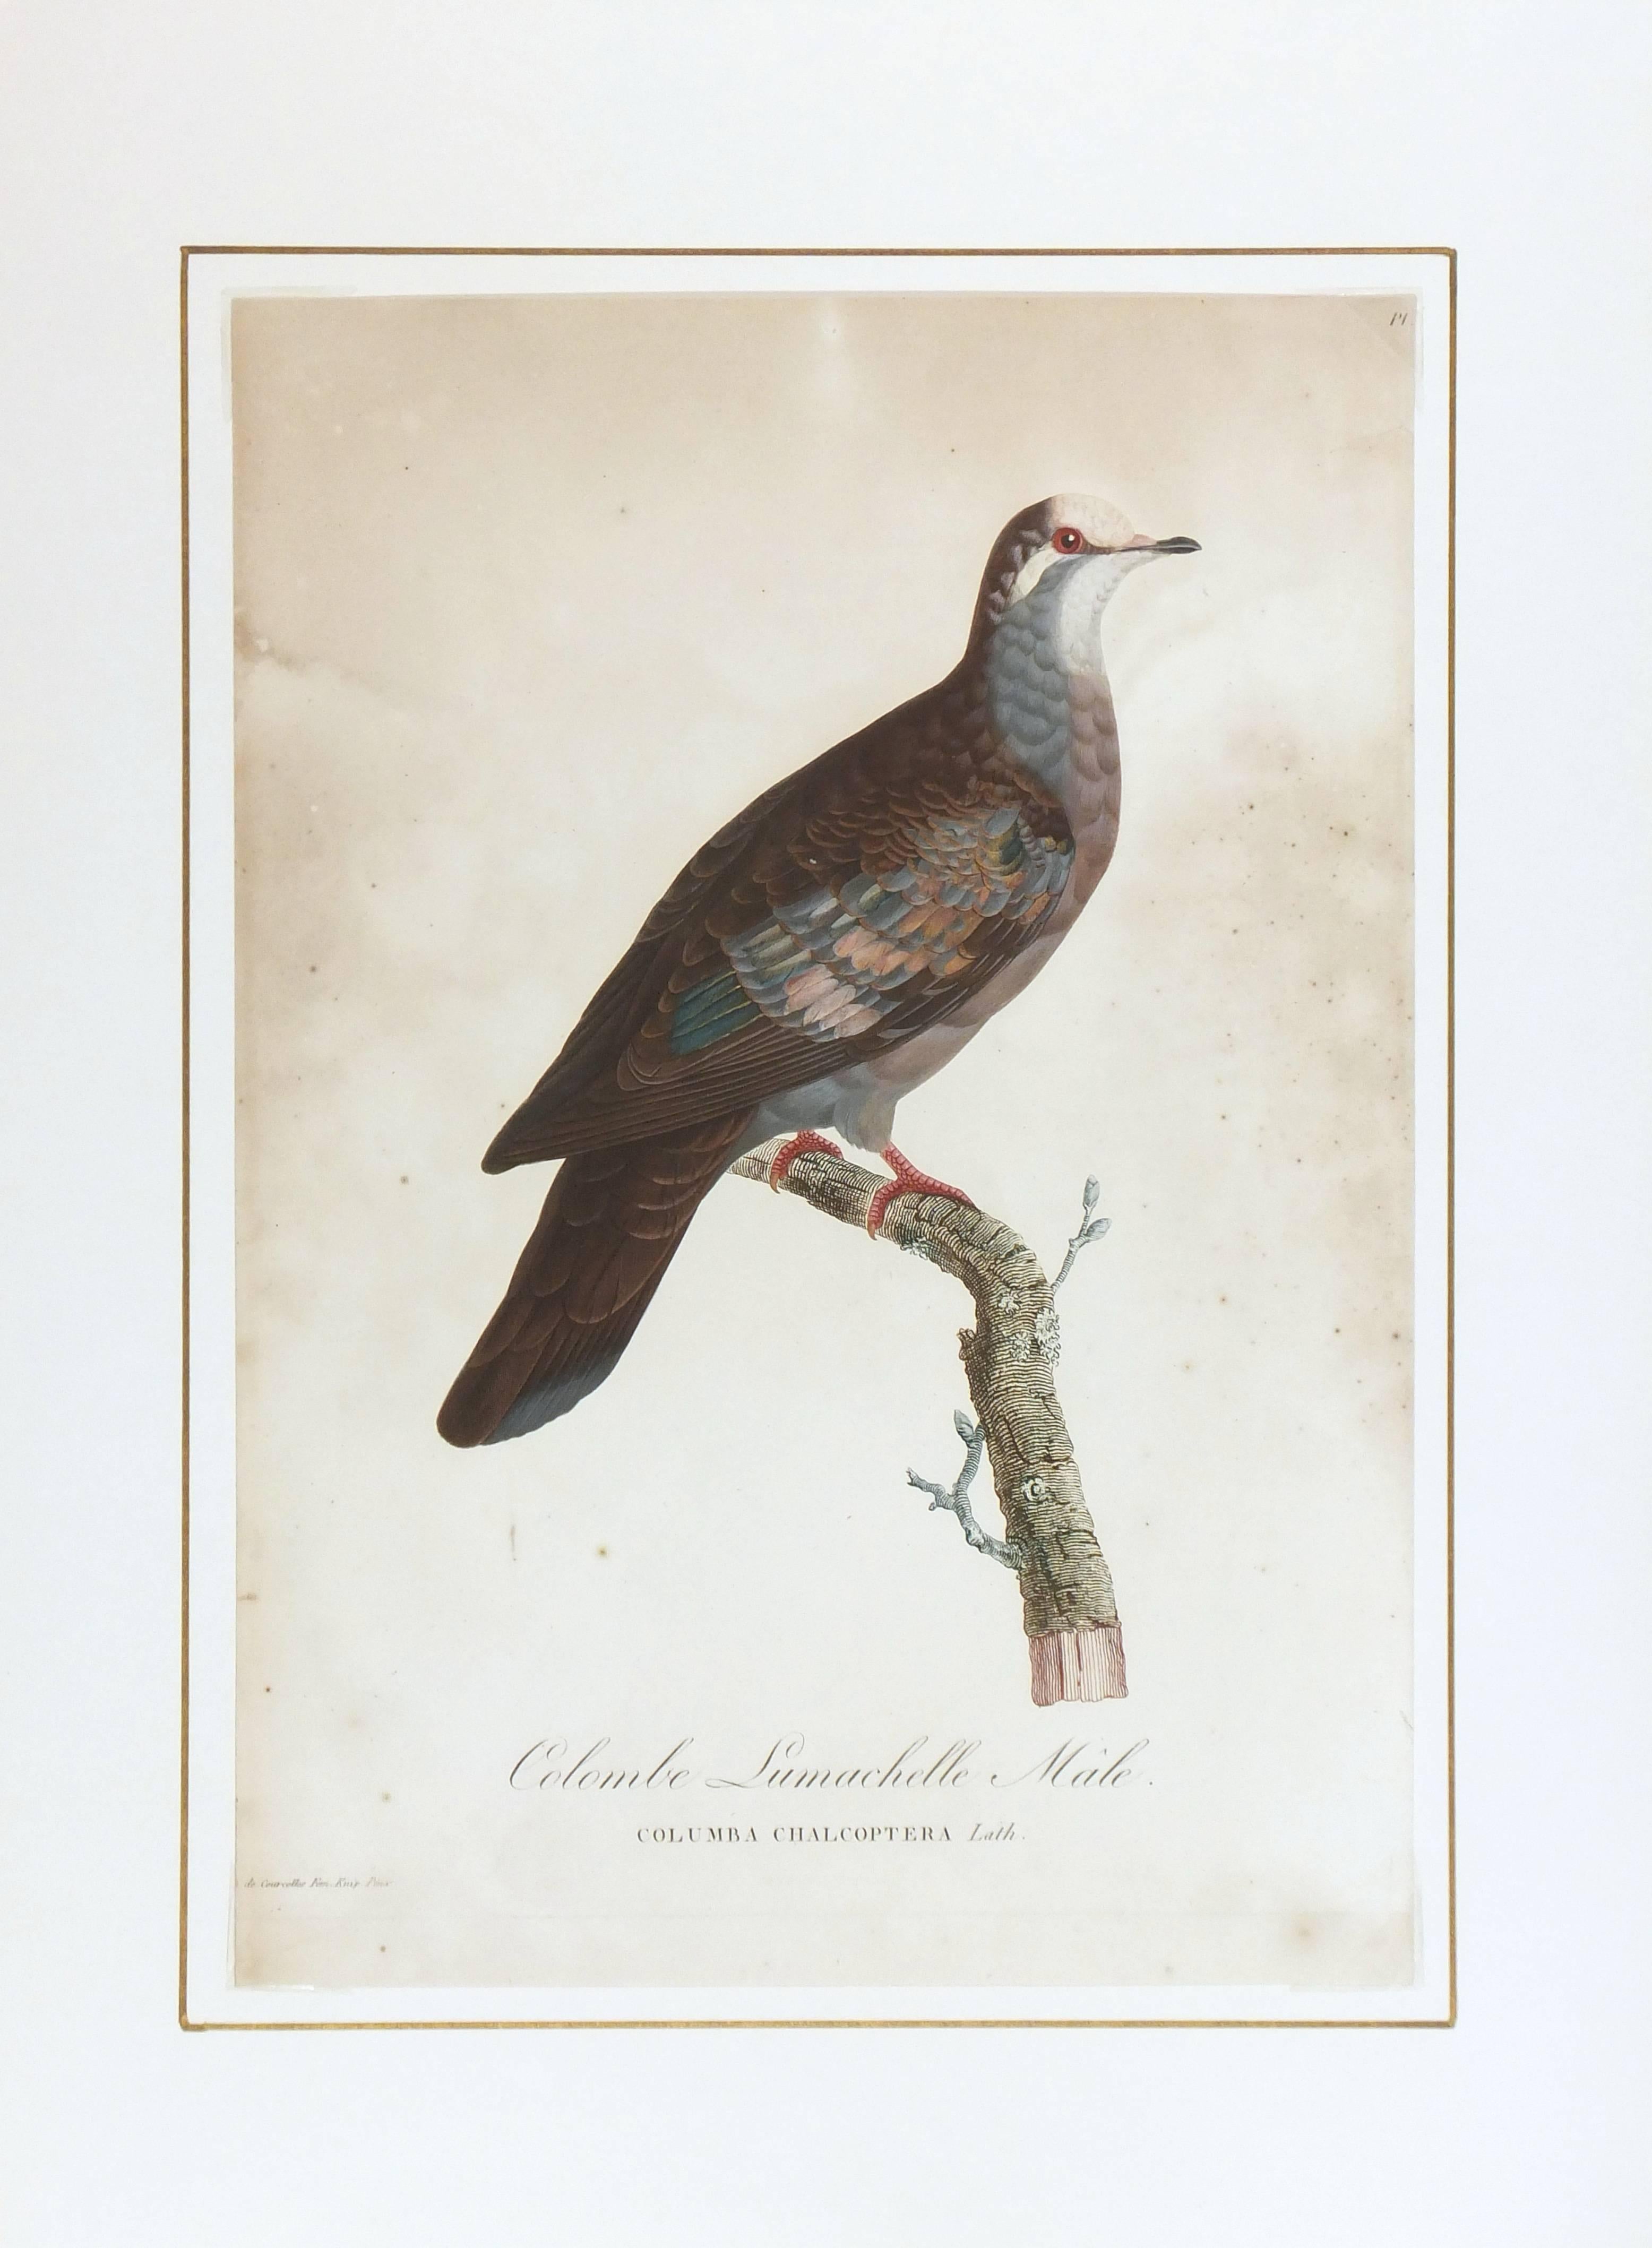 Hand-tinted aquatint etching of a male Lumachelle Pigeon from 